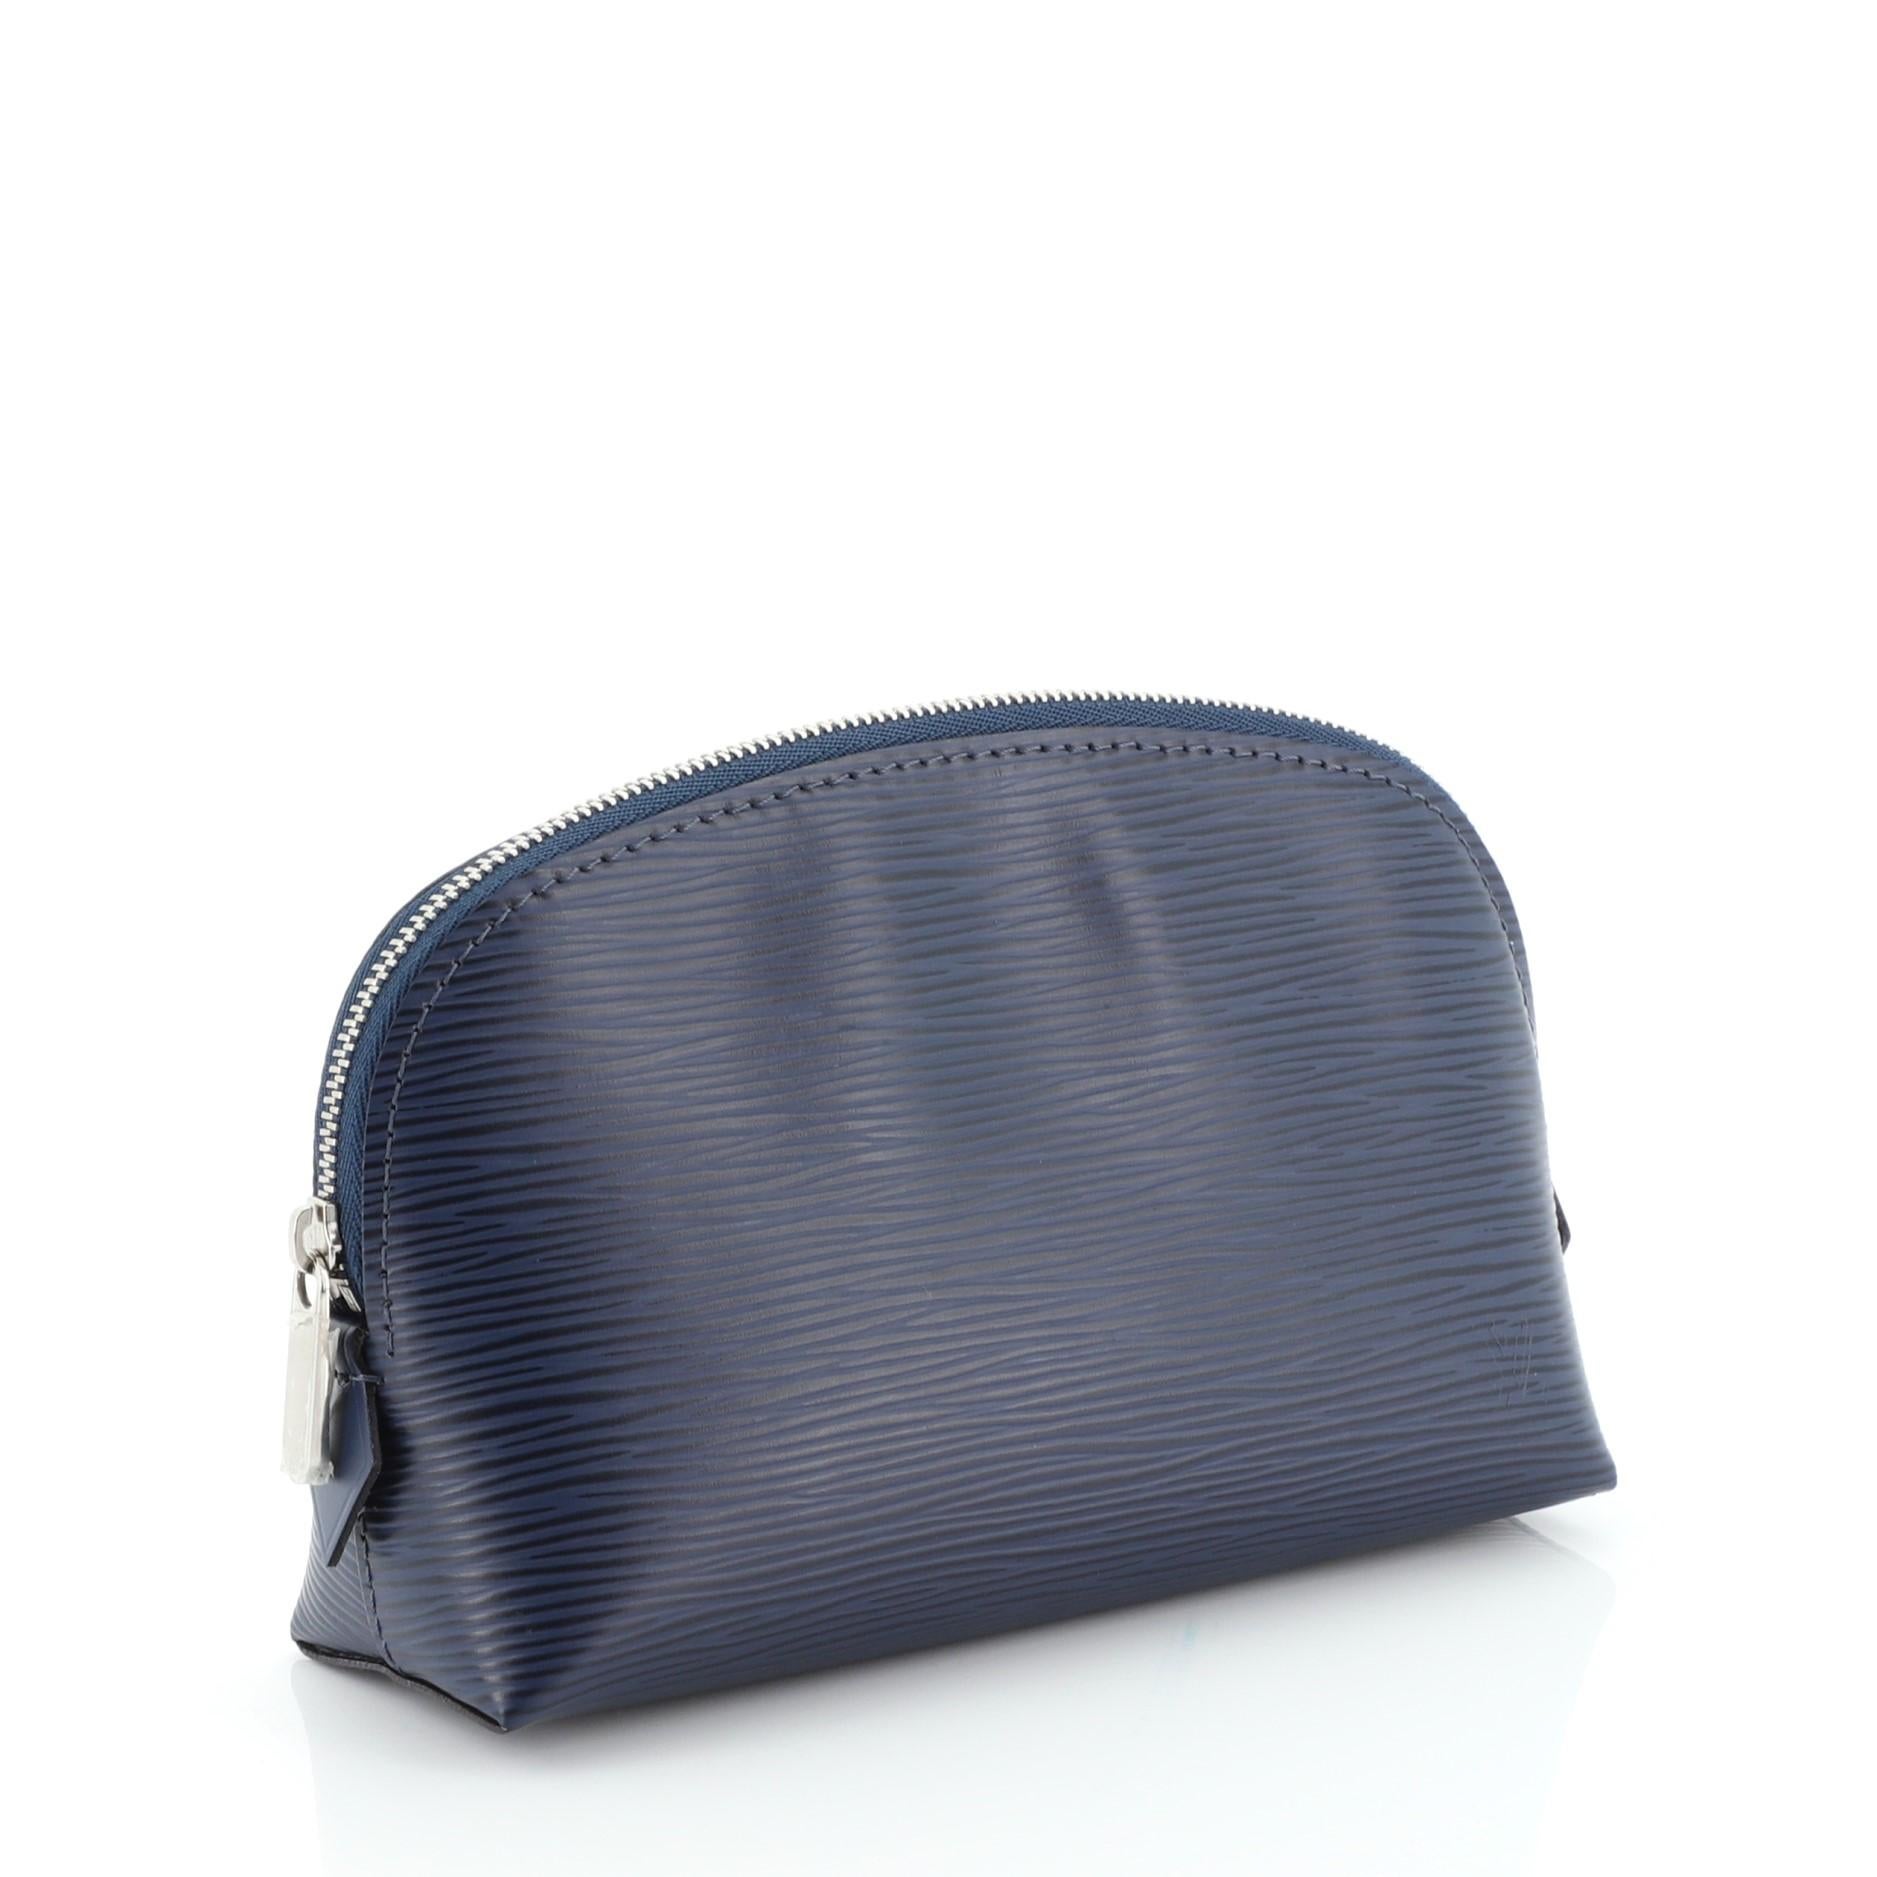 This Louis Vuitton Cosmetic Pouch Epi Leather PM, crafted in blue leather, features silver-tone hardware. Its zip closure opens to a blue leather interior with slip pocket. Authenticity code reads: SR0178 

Estimated Retail Price: $460
Condition: